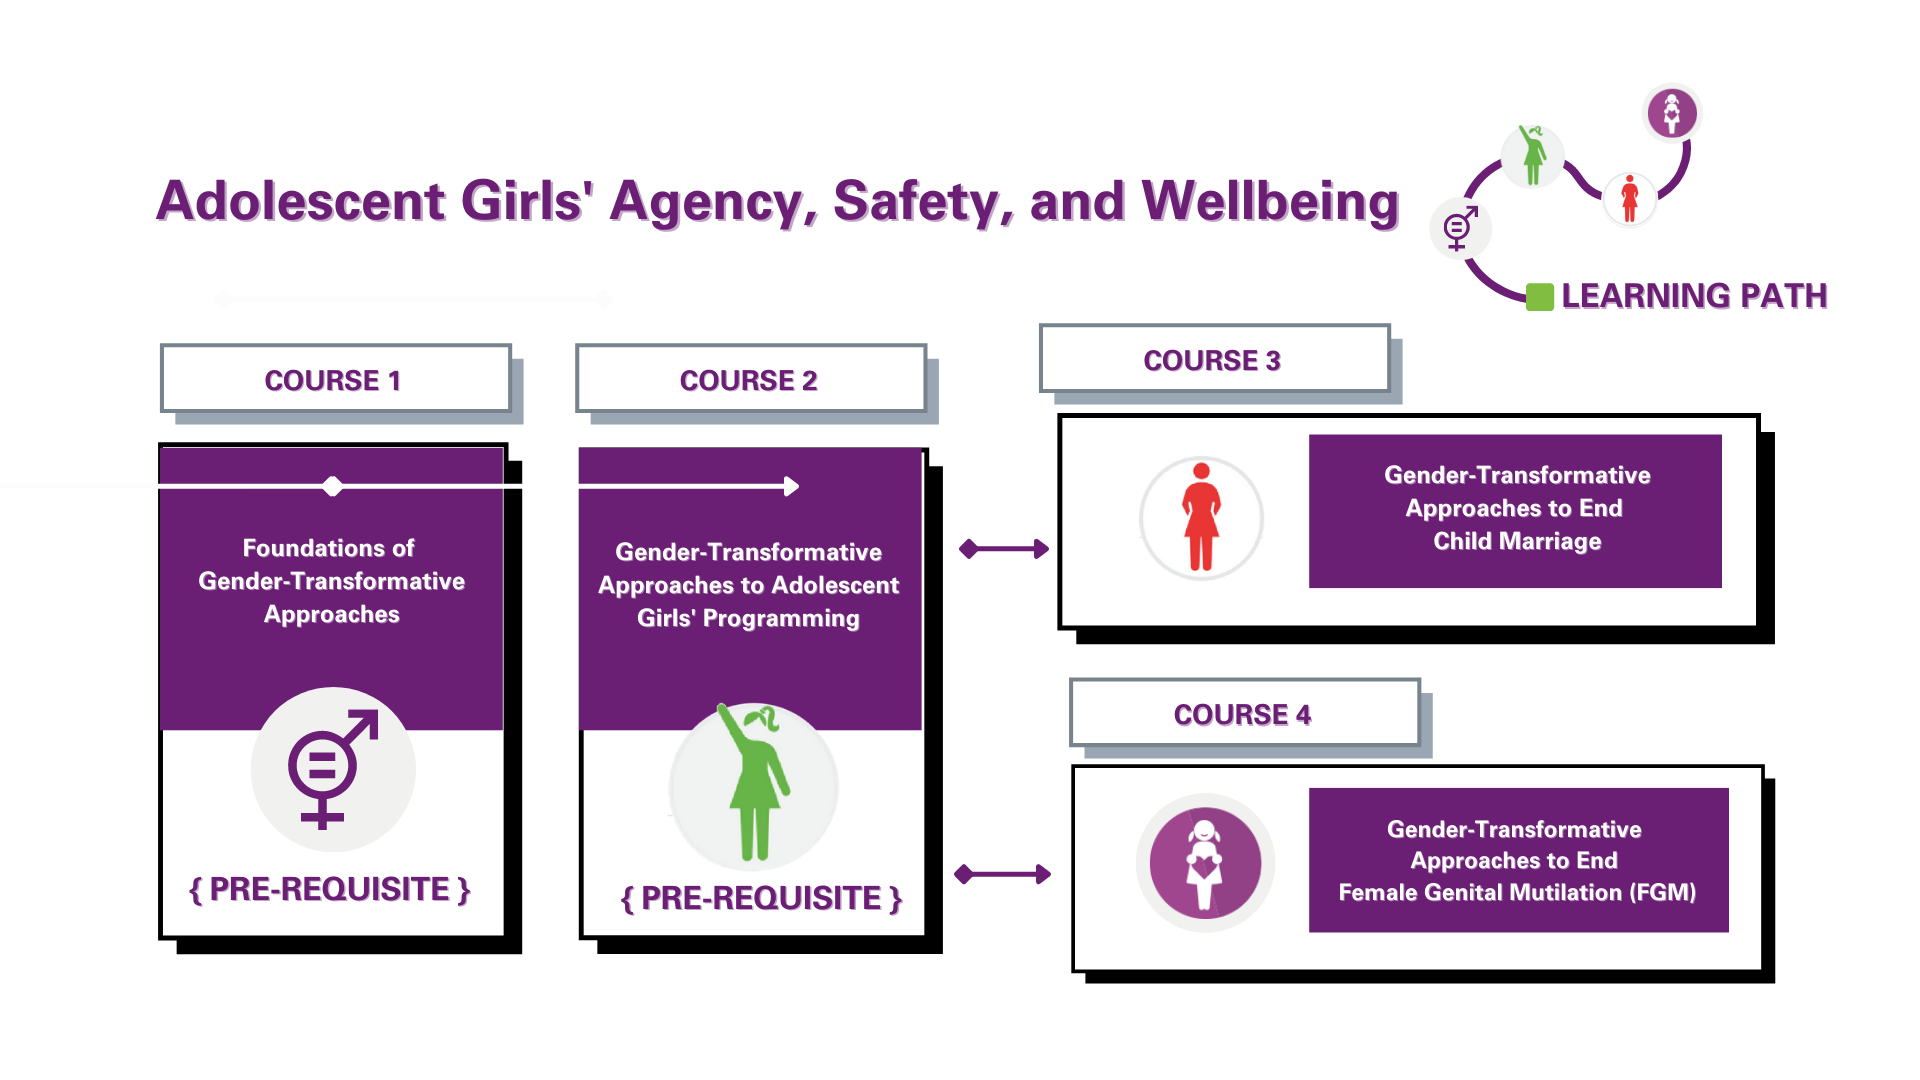 The Adolescent Girls' Agency, Safety and Wellbeing learning path